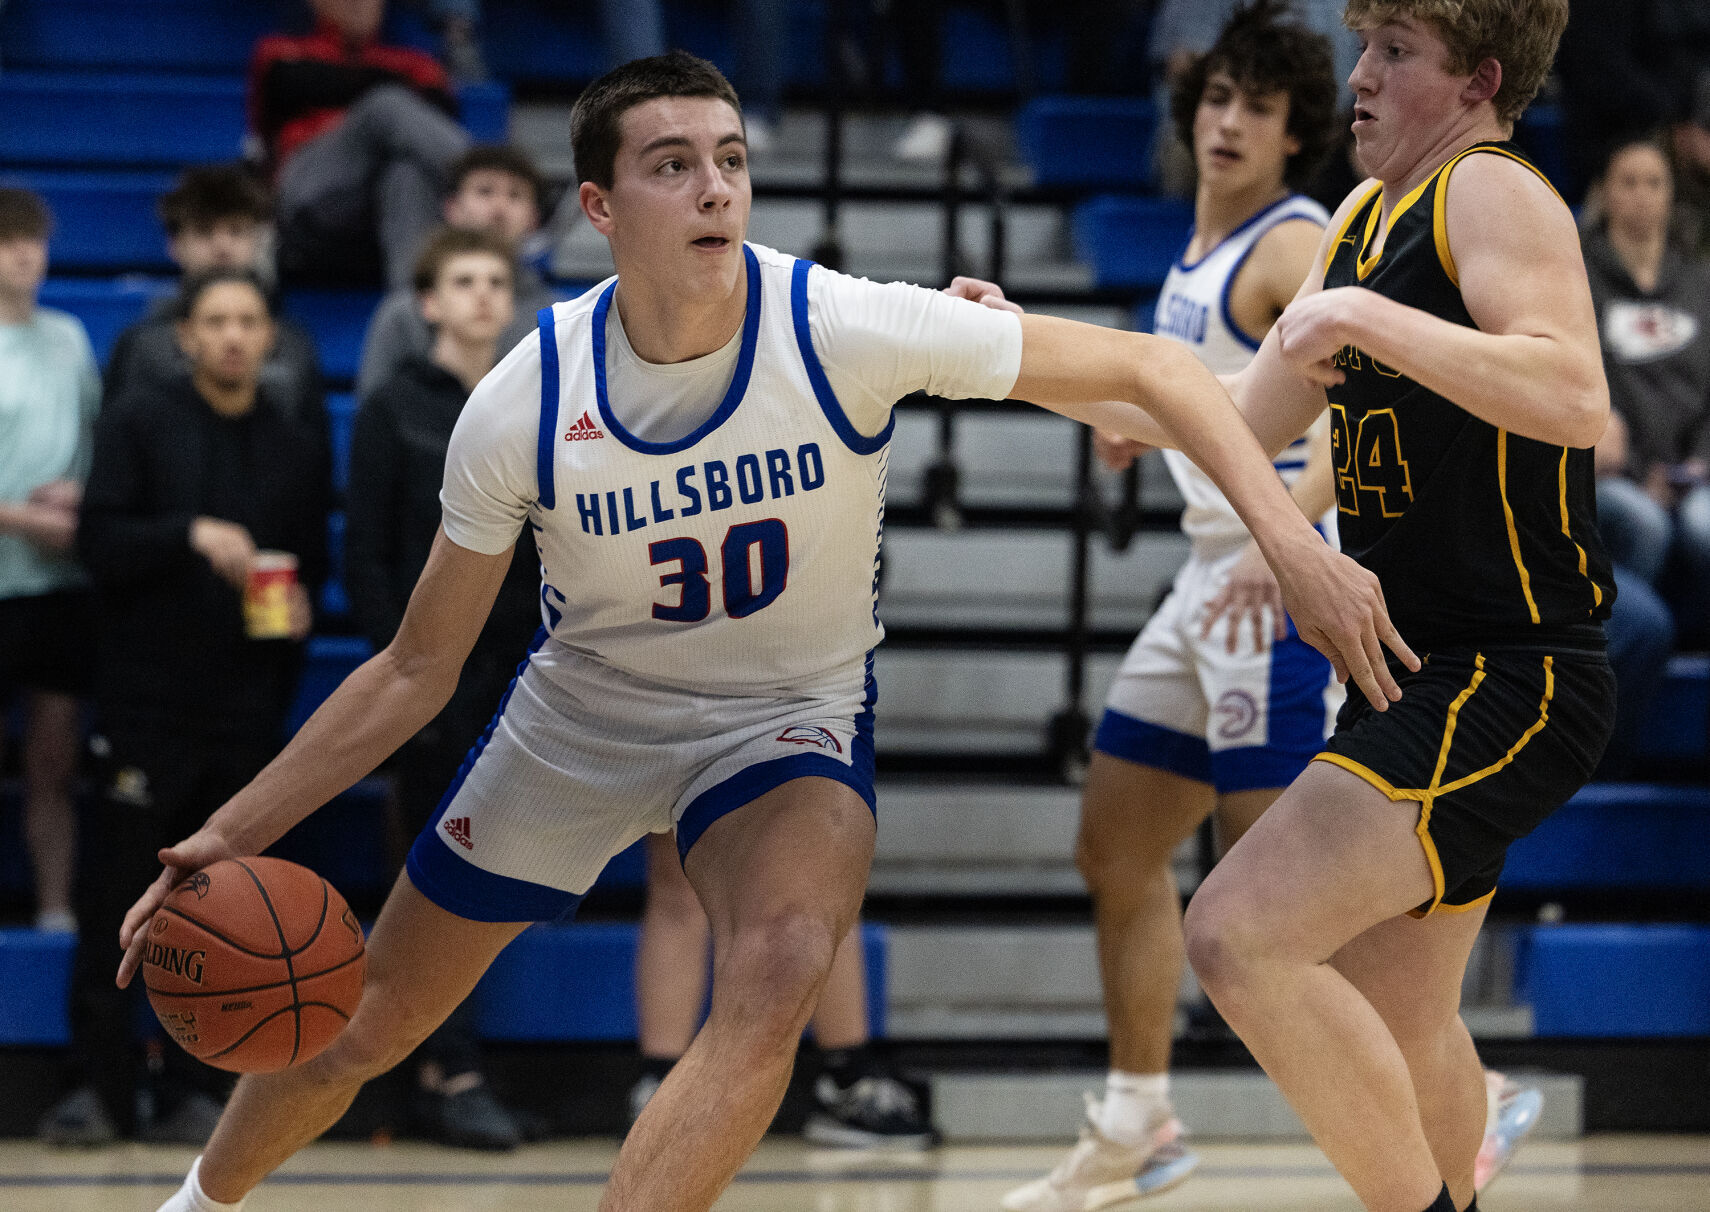 Hillsboro’s Dominant Performance Secures Victory Over Festus in Jefferson County Showdown